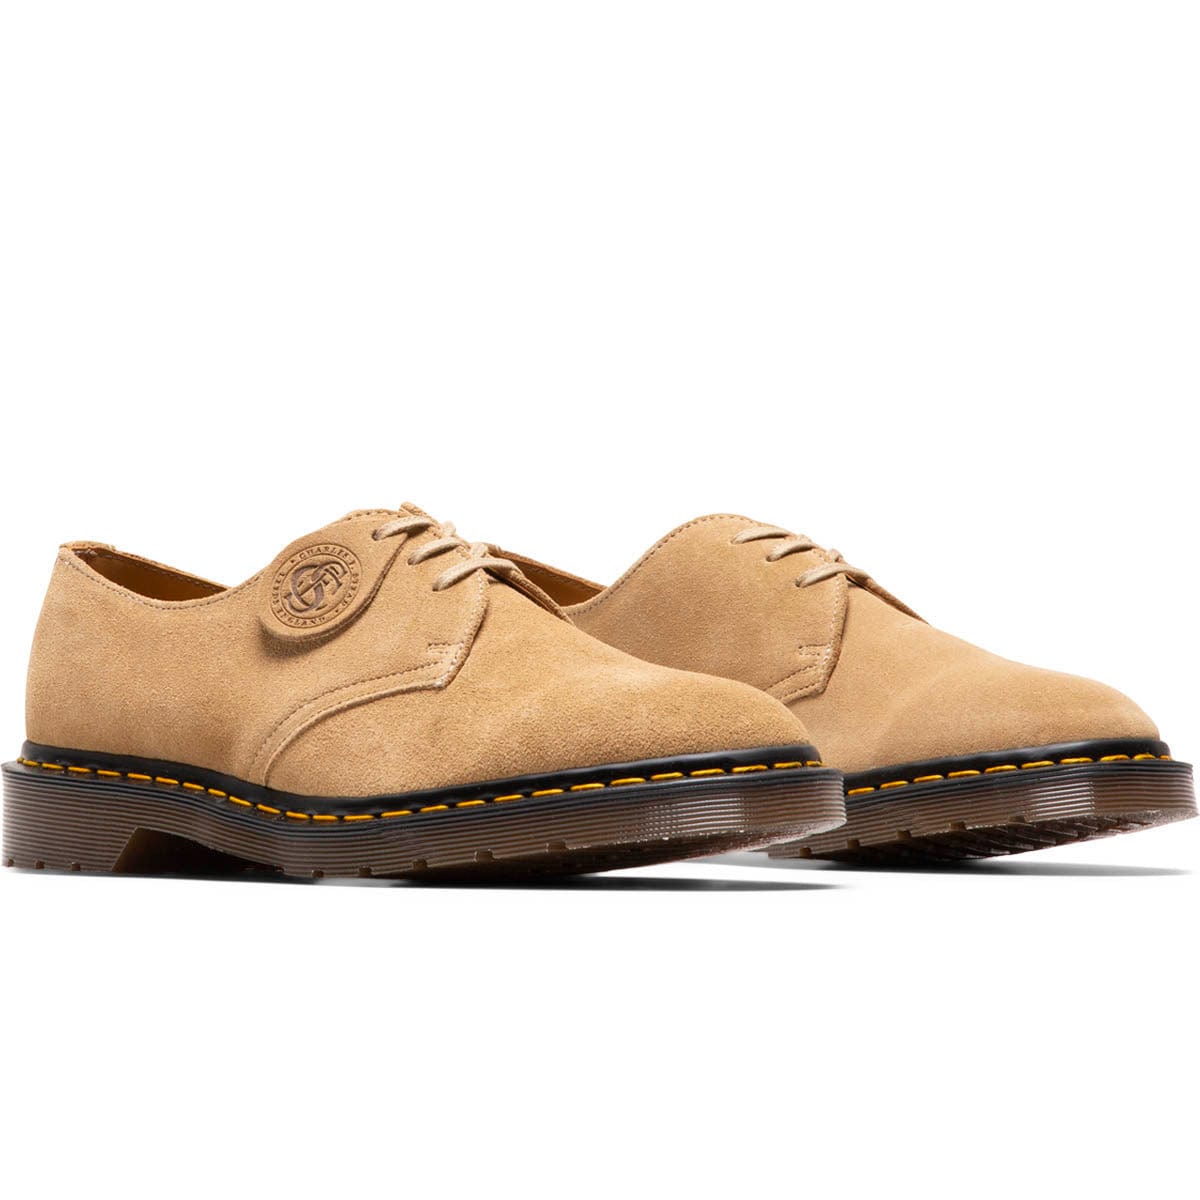 Dr. Martens Casual 1461 OXFORD SHOES